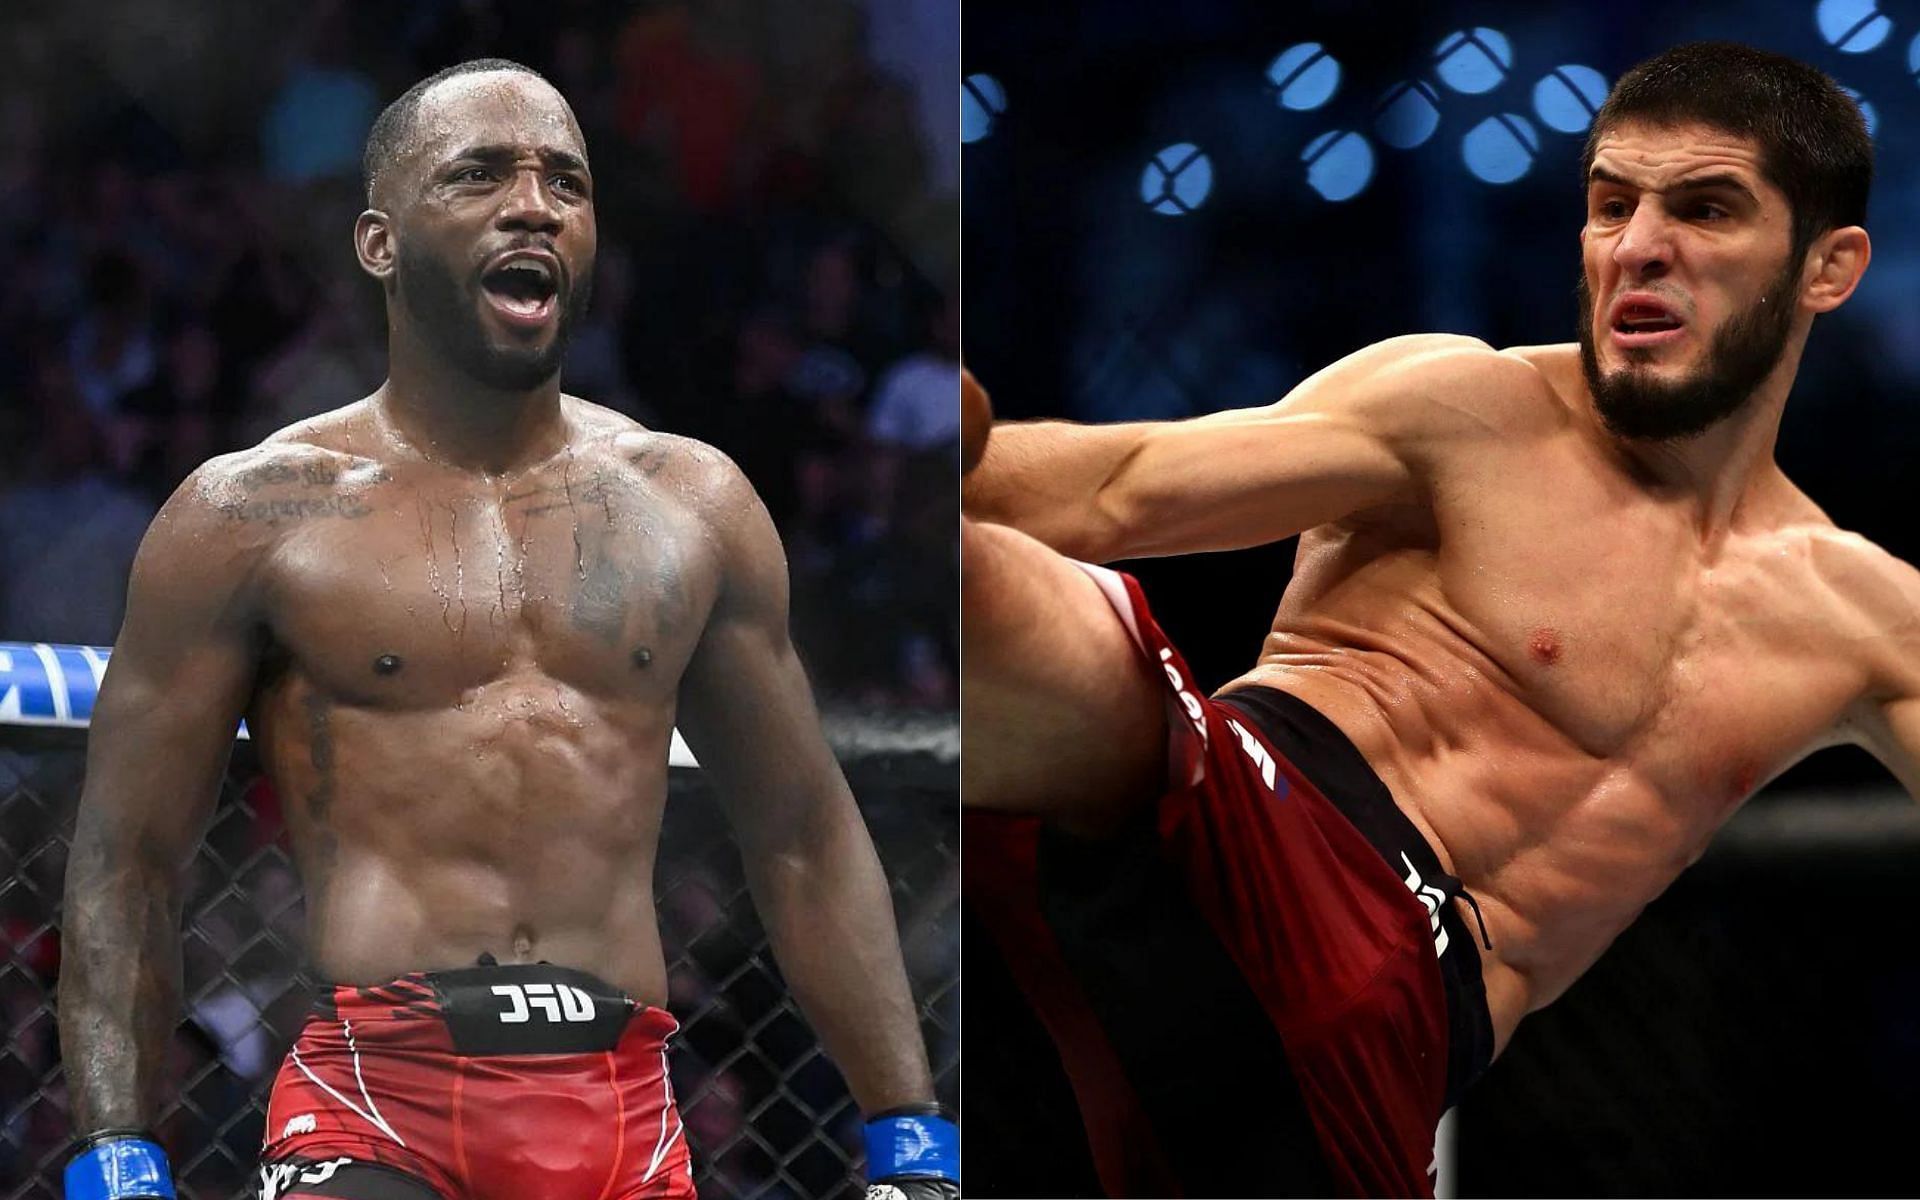 Leon Edwards (left) and Islam Makhachev (right)